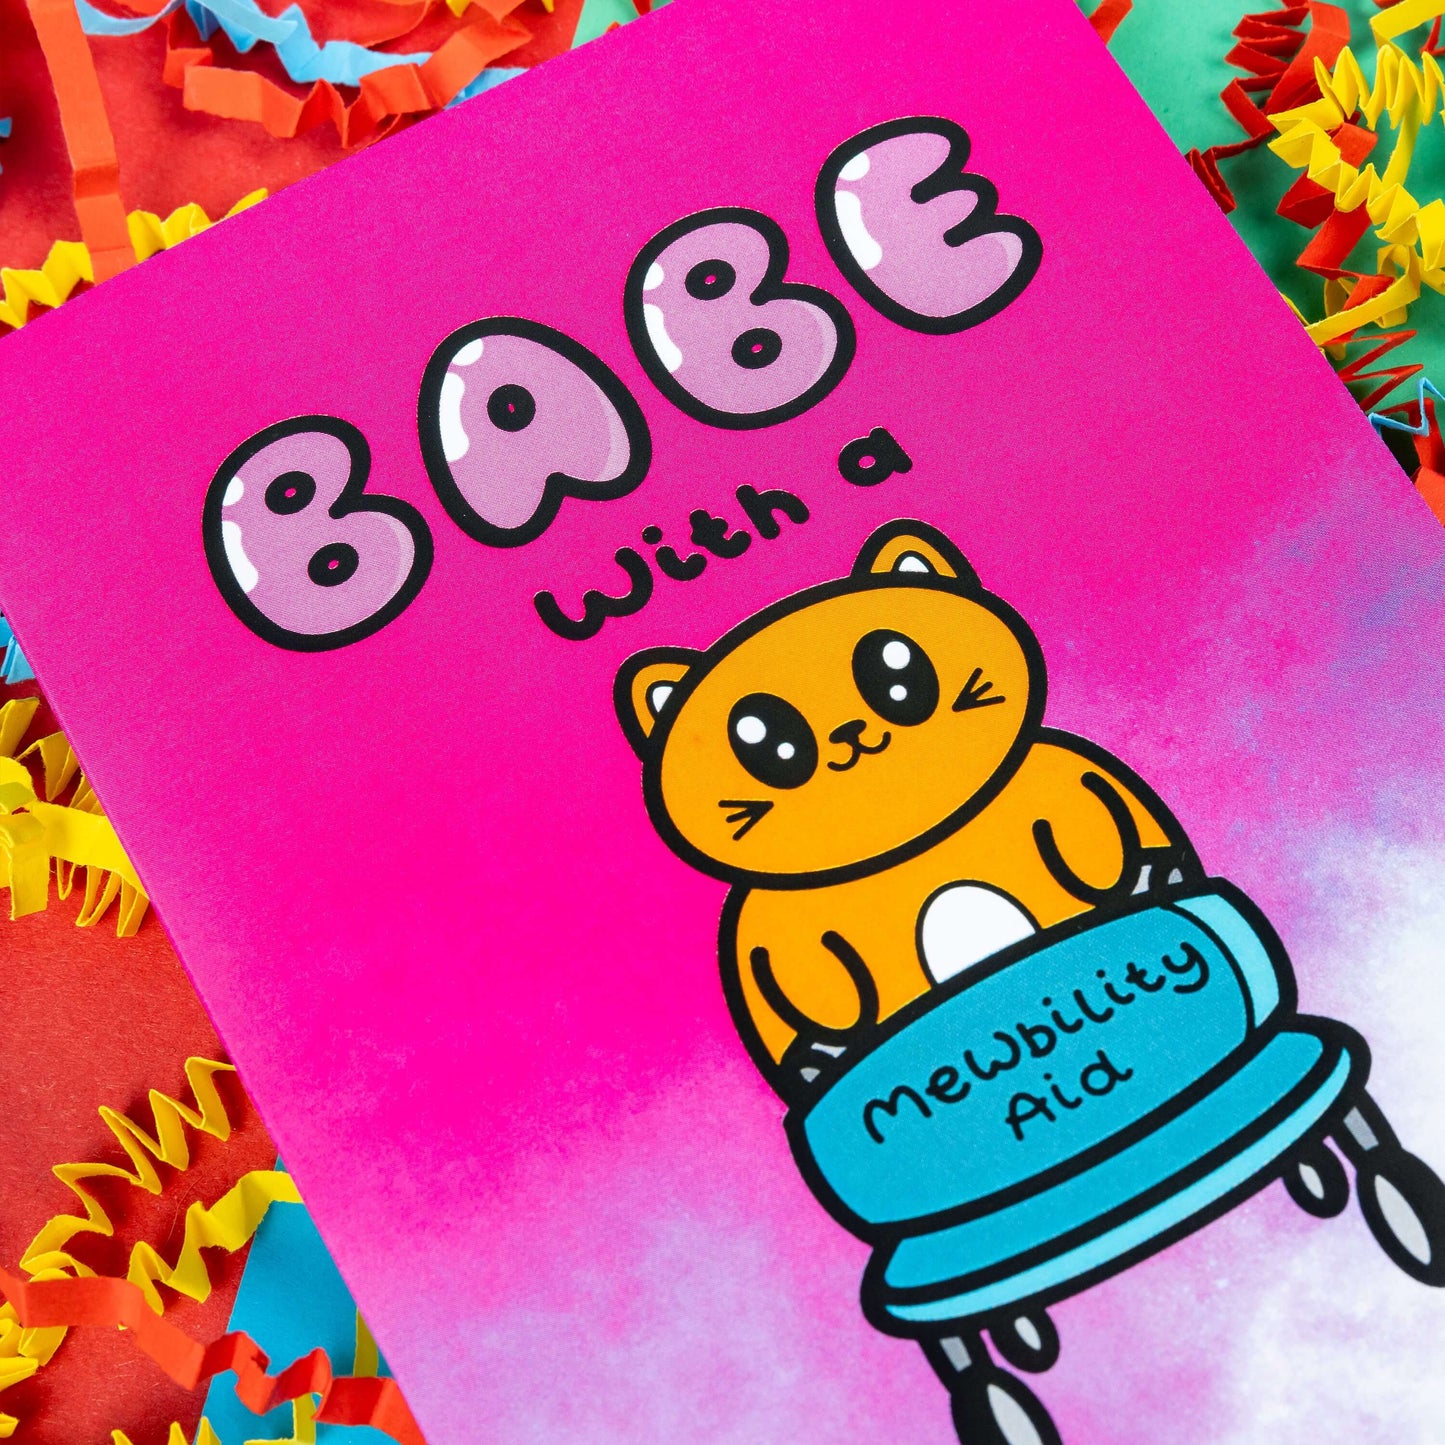 Close up of a hot pink and white gradient greeting card with a cute ginger cat holding a blue mobility aid. 'Babe with a mewbility aid' is written on the card. The background of the photo is colourful card confetti. Design inspired by disabilities and chronic illness.